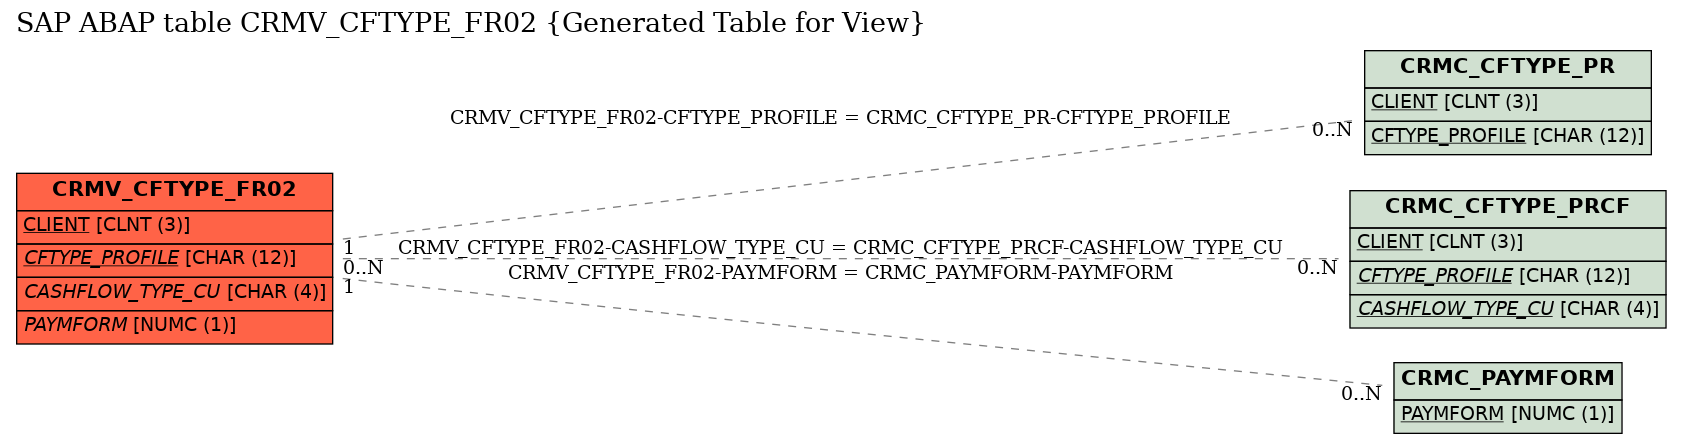 E-R Diagram for table CRMV_CFTYPE_FR02 (Generated Table for View)